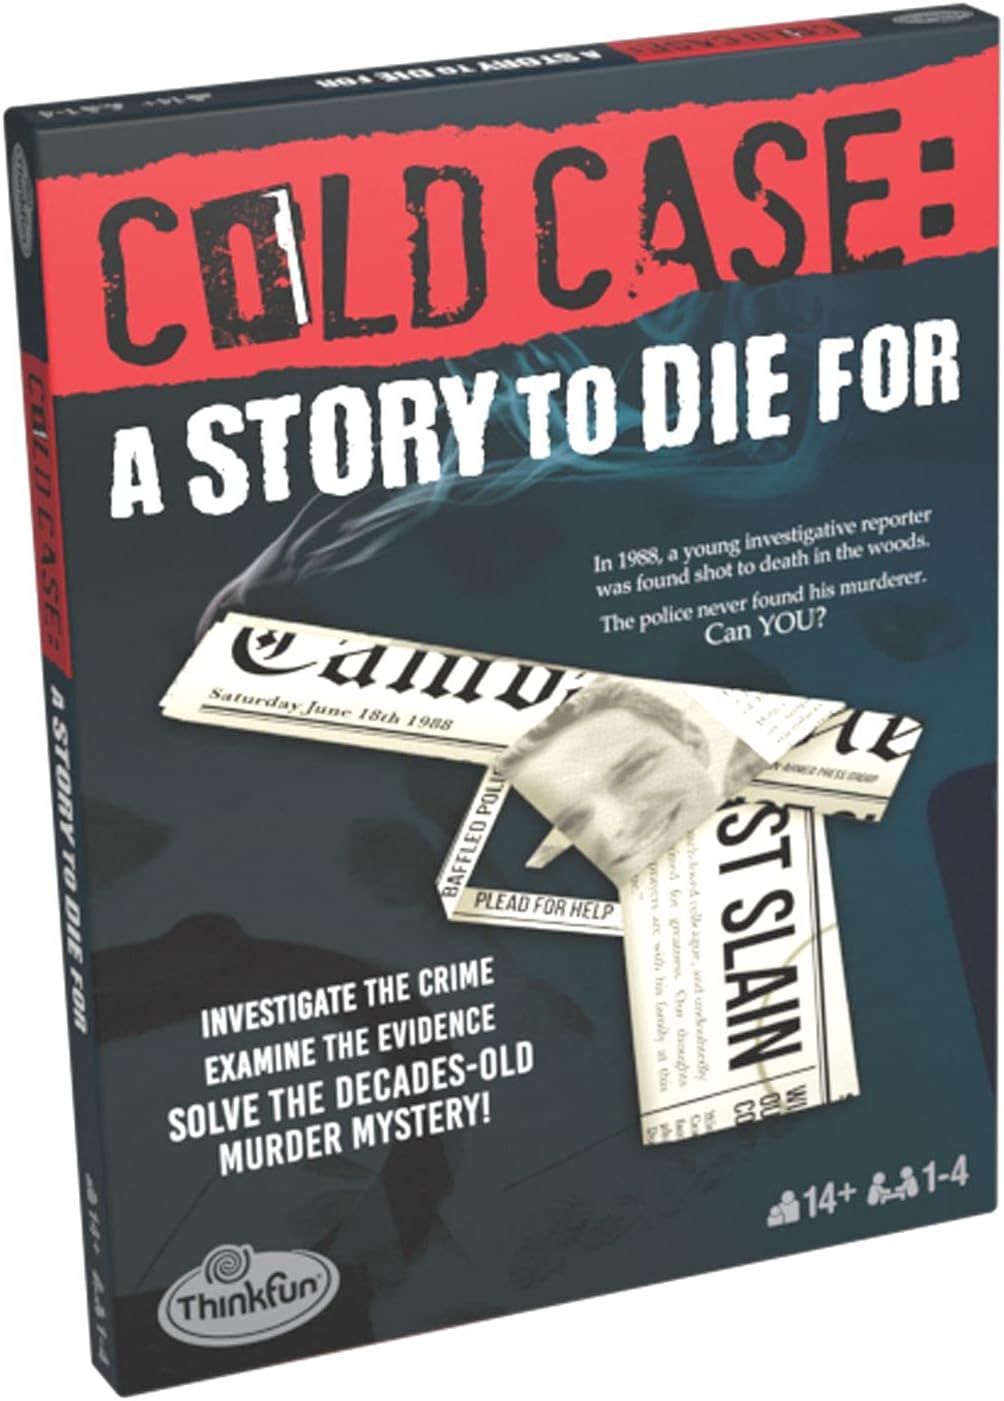 Cold Case - A Story to Die For